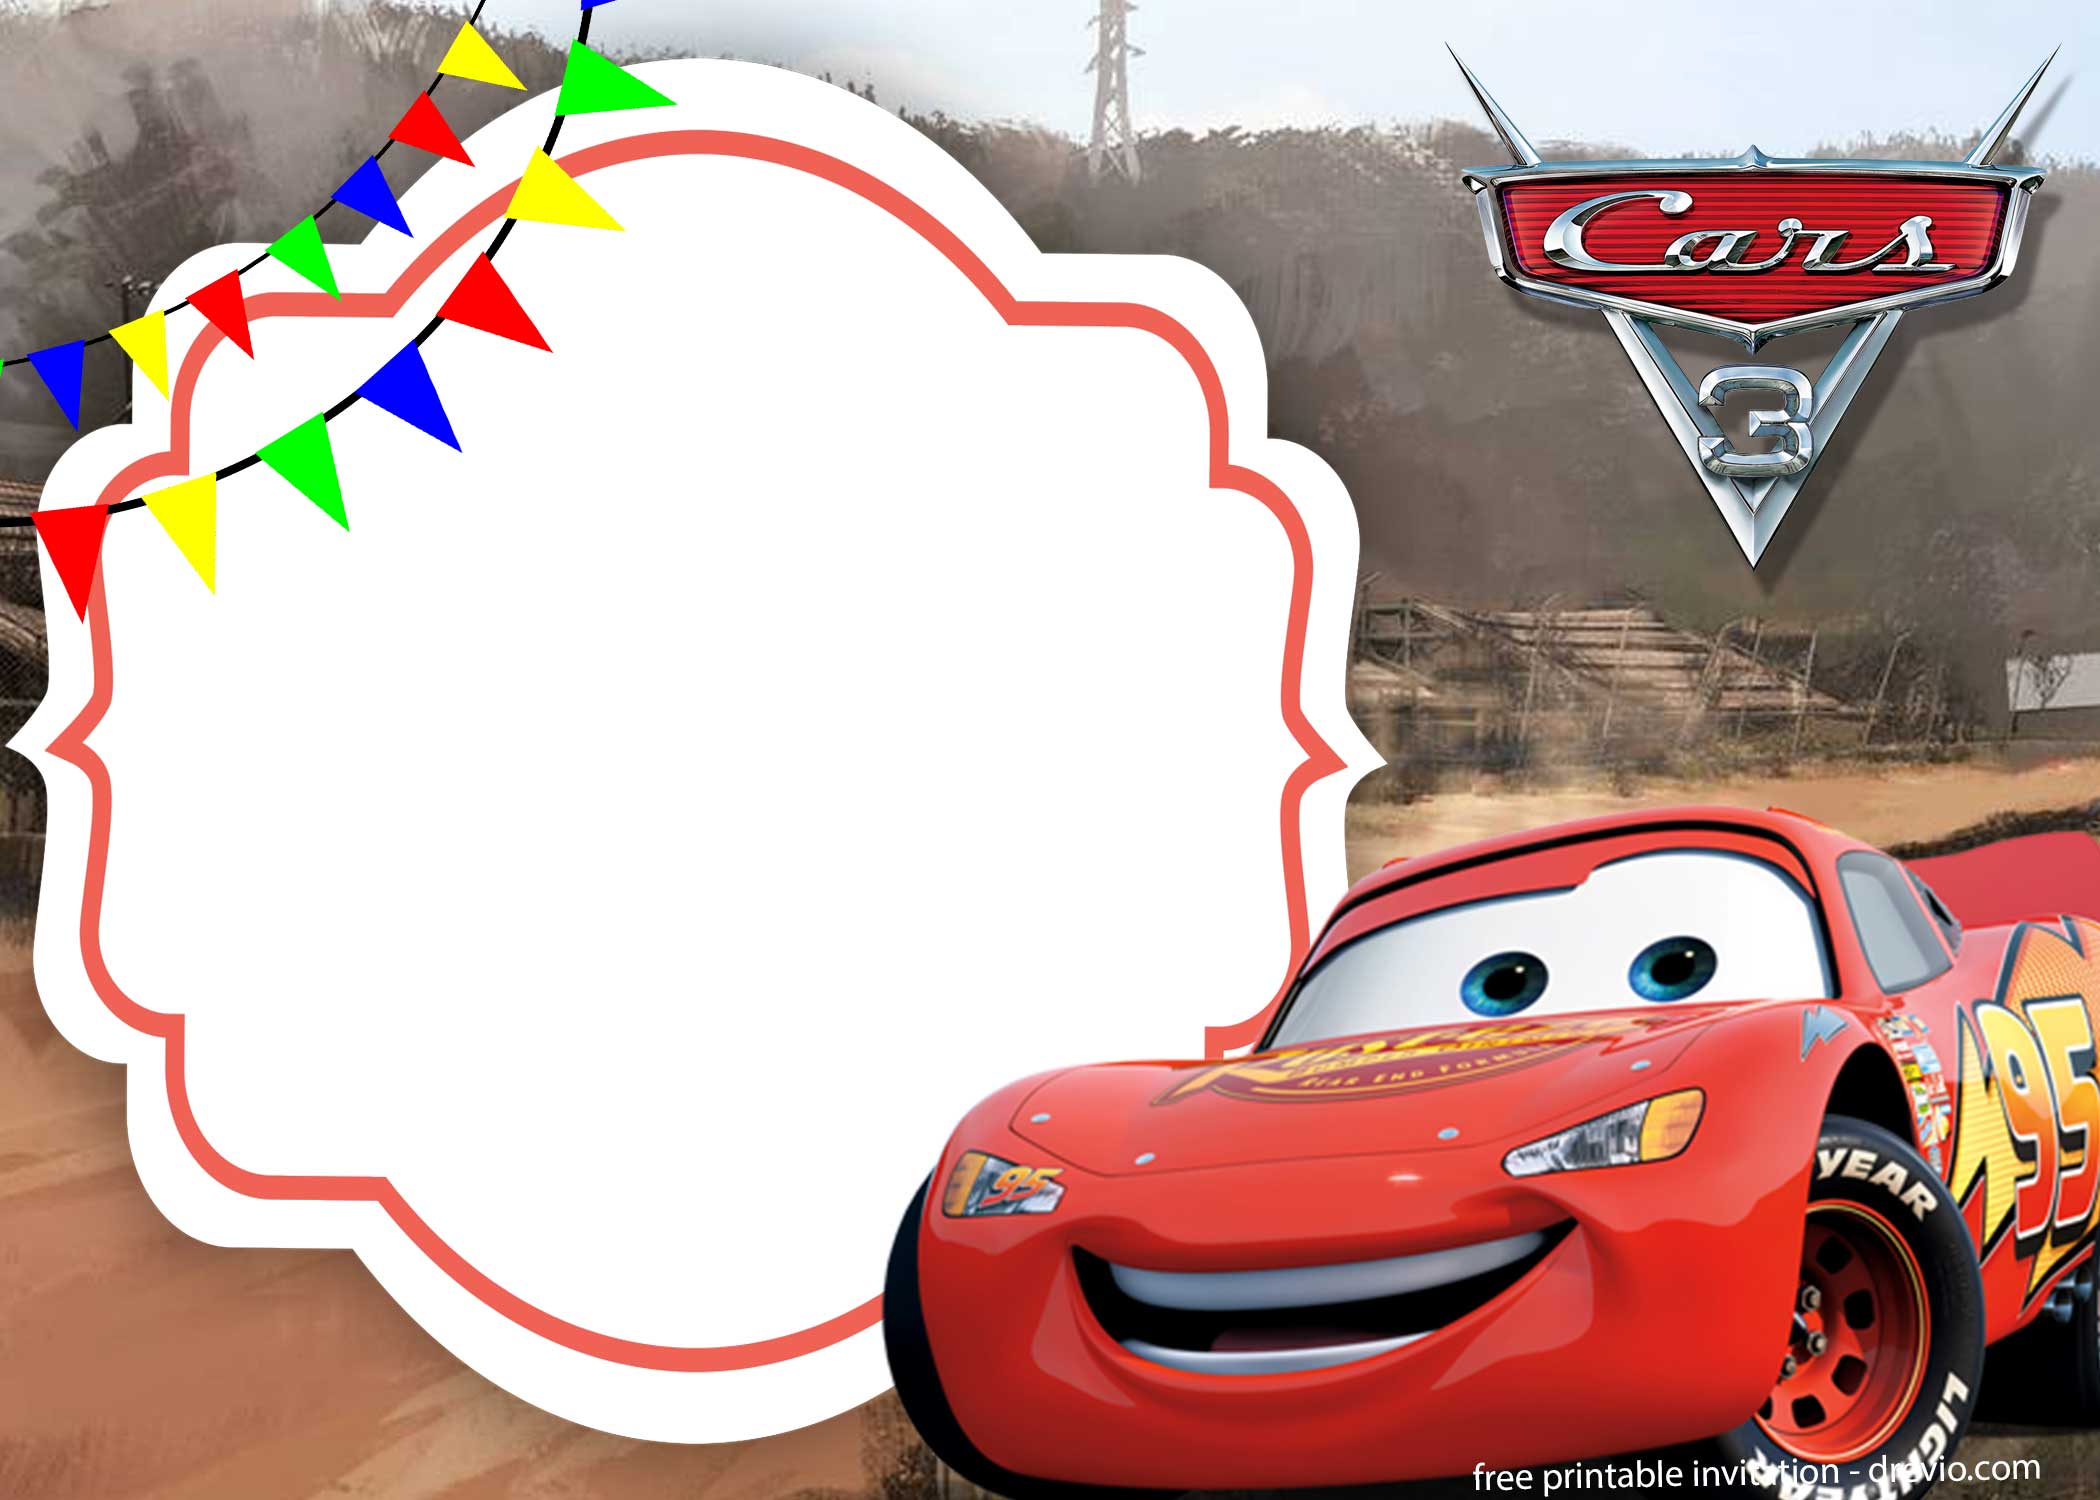 FREE The Cars 3 with photo invitation template FREE Printable